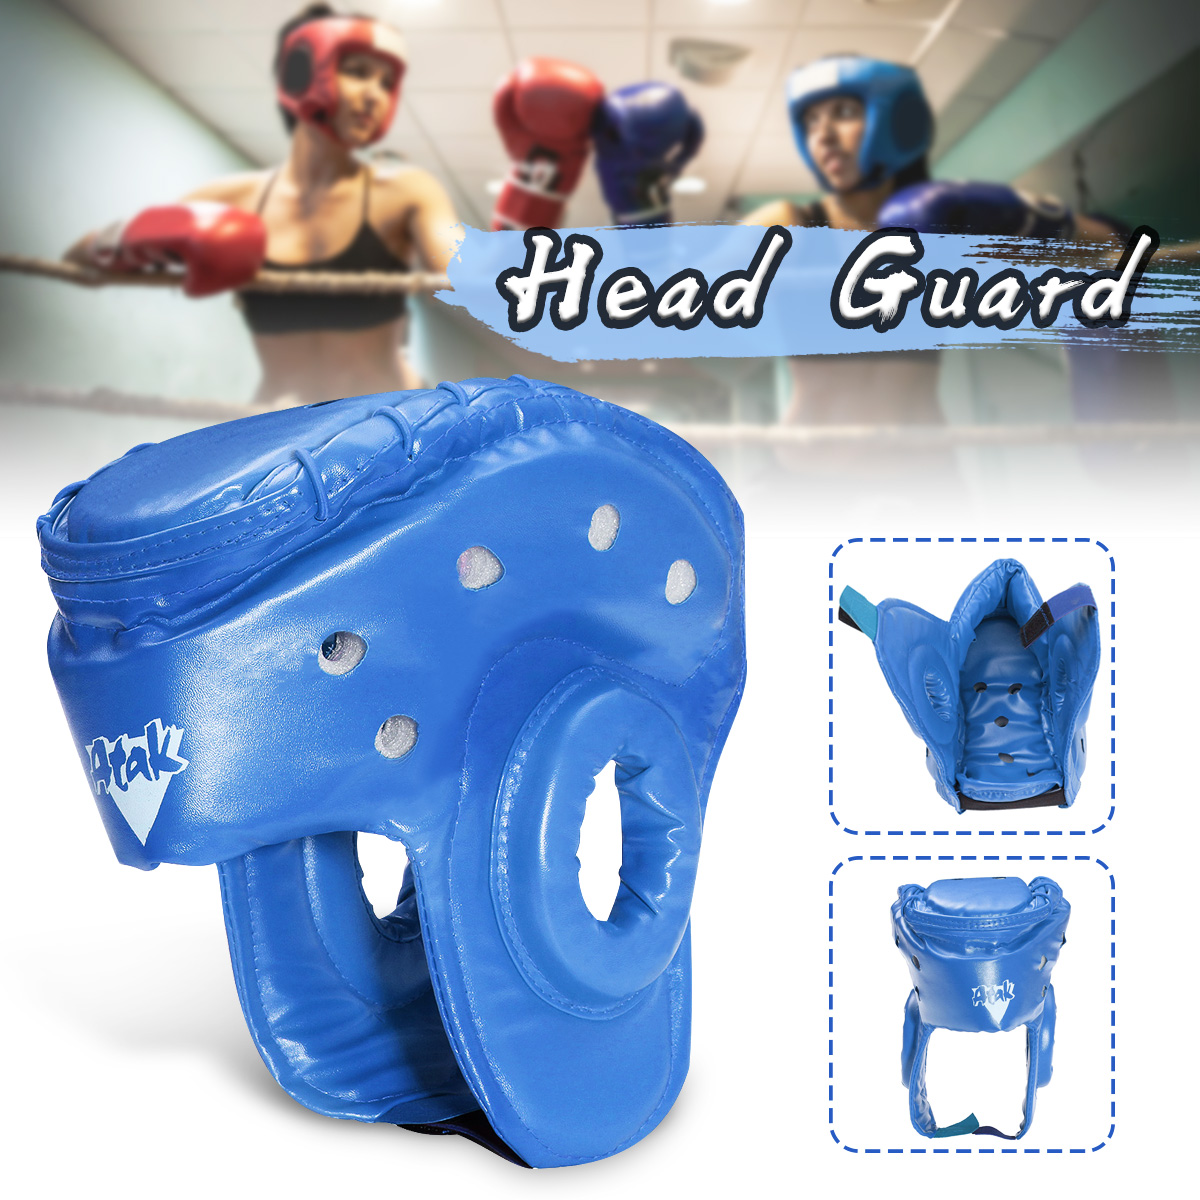 ARD CHAMPS™ Protector Guard Wrestling Helmet Head Gear Boxing MMA UFC Rugby-Blue